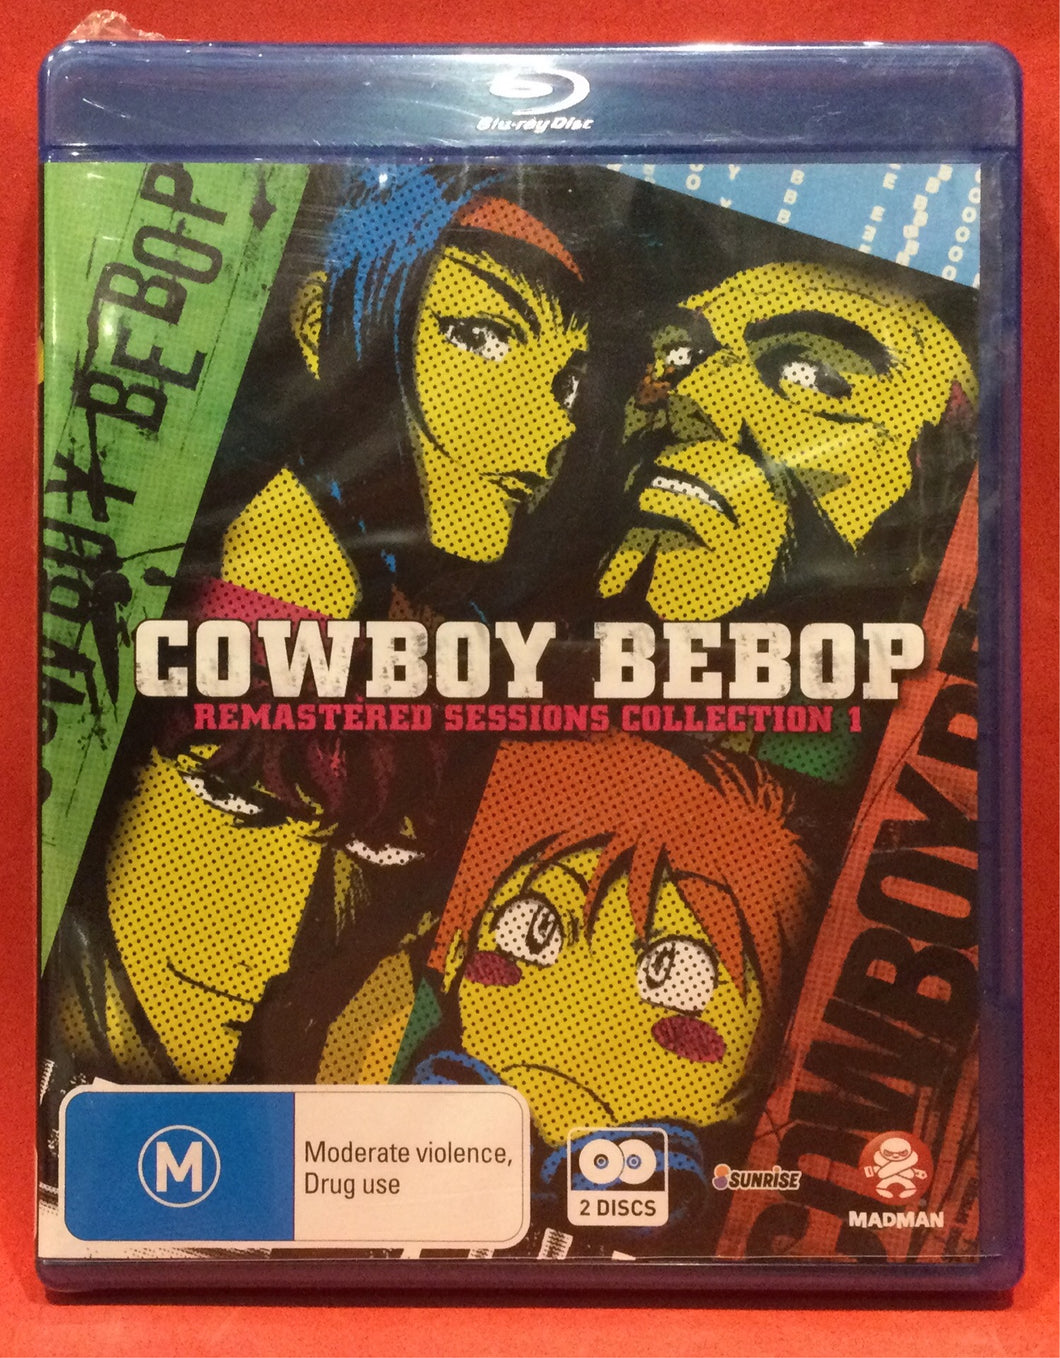 COWBOY BEBOP - REMASTERED - COLLECTION 1 - BLU-RAY - 2 DVD DISCS (SEALED)